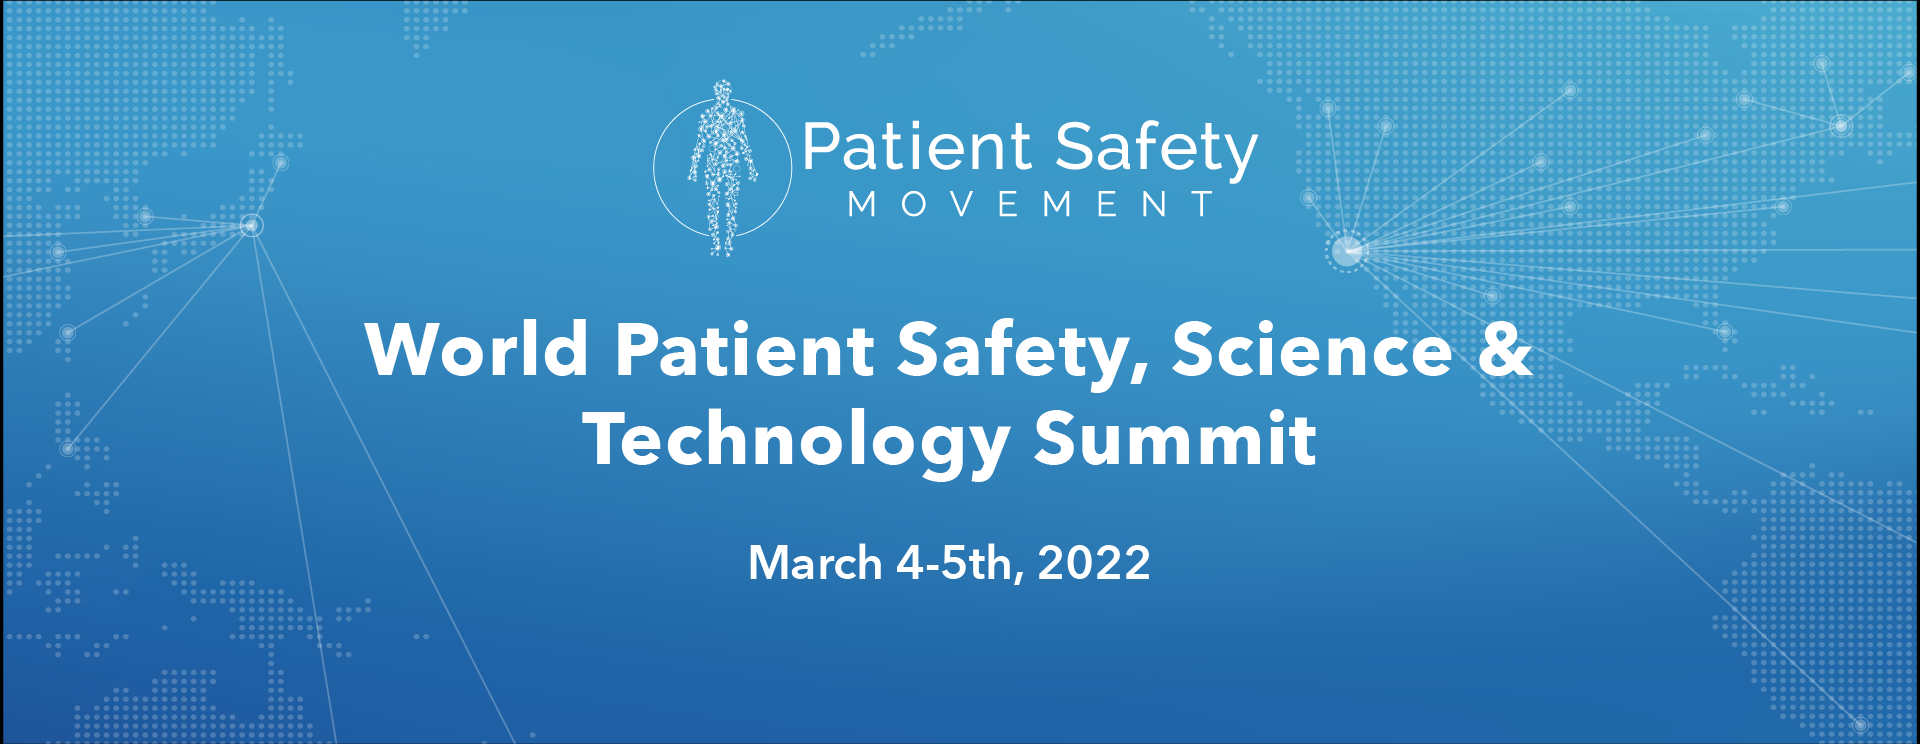 2022 World Patient Safety, Science & Technology Summit